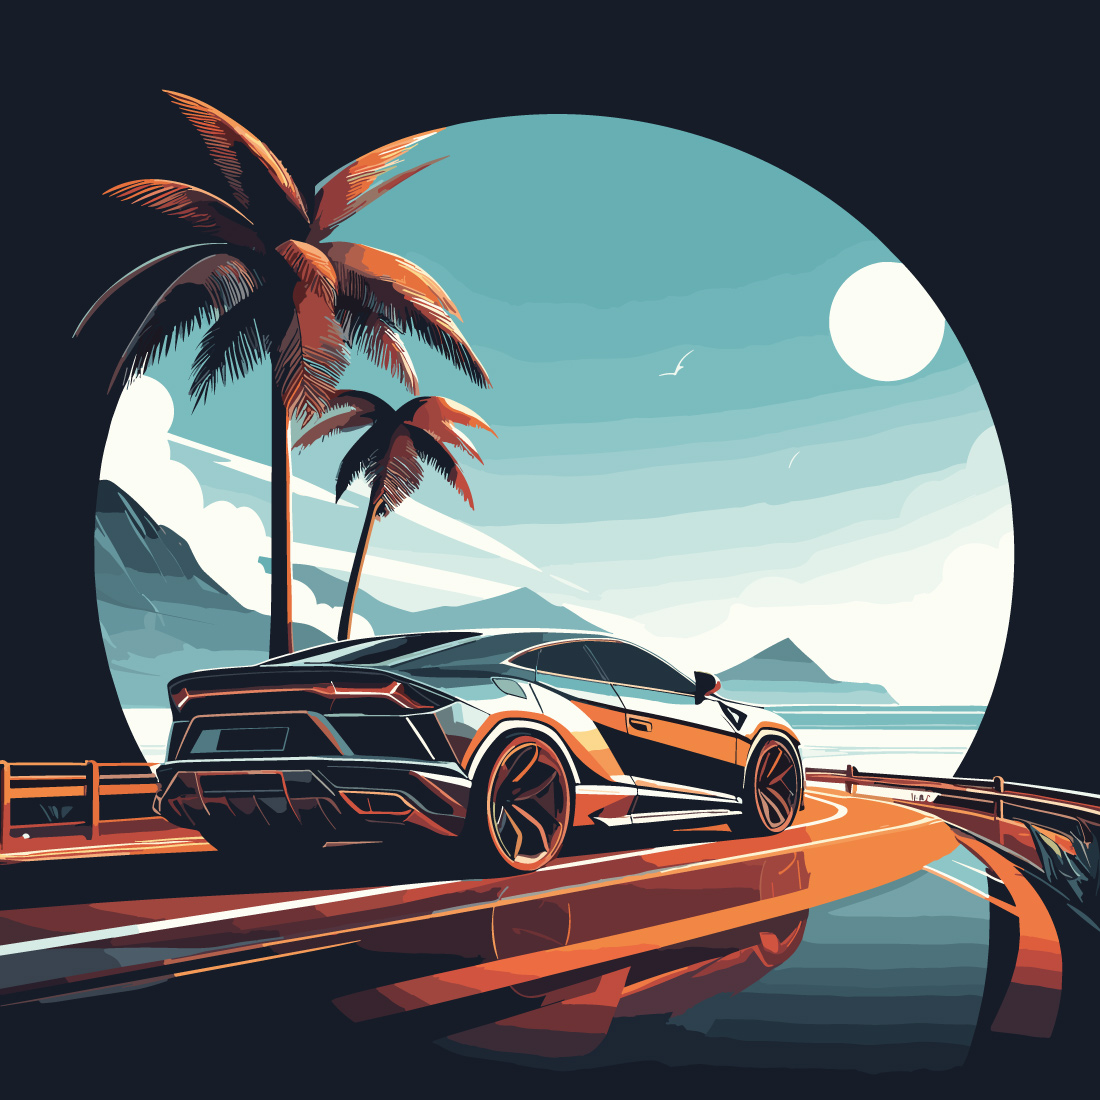 Fancy car drifting on a bautiful place preview image.